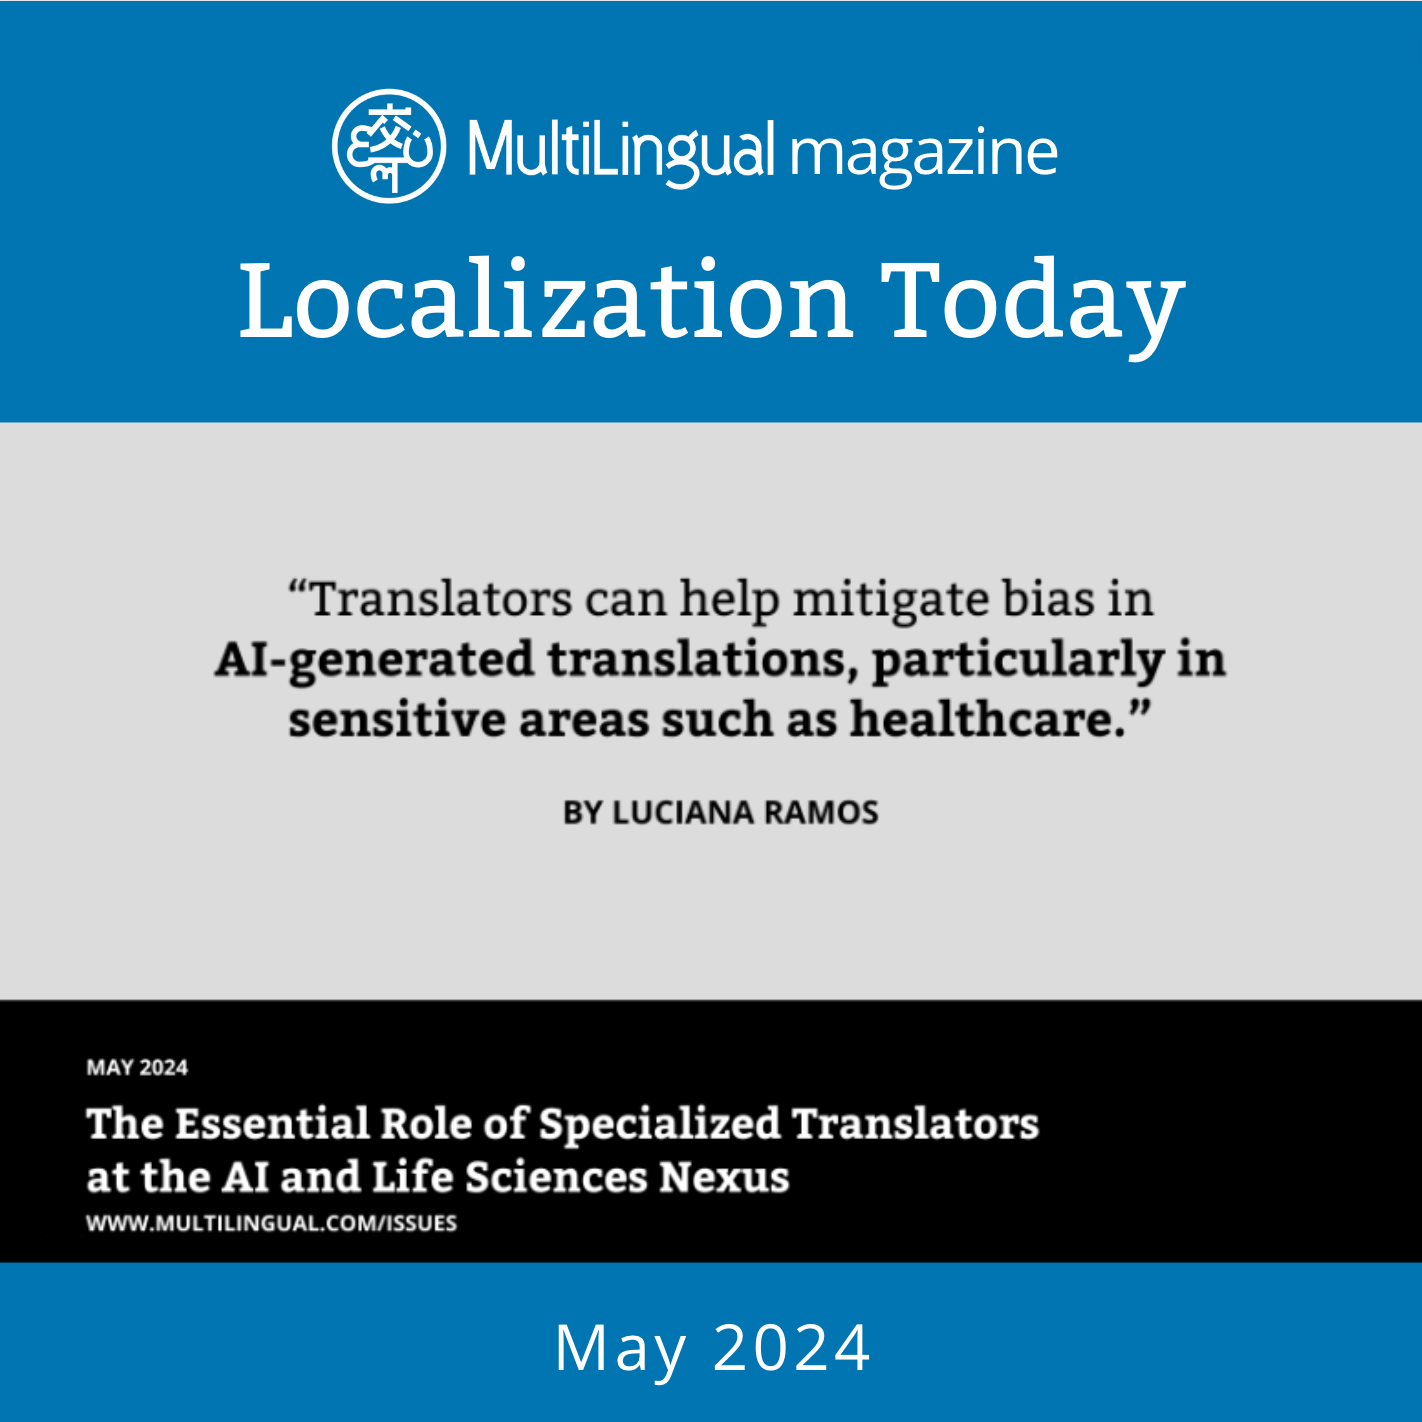 The Essential Role of Specialized Translators at the AI and Life Sciences Nexus.